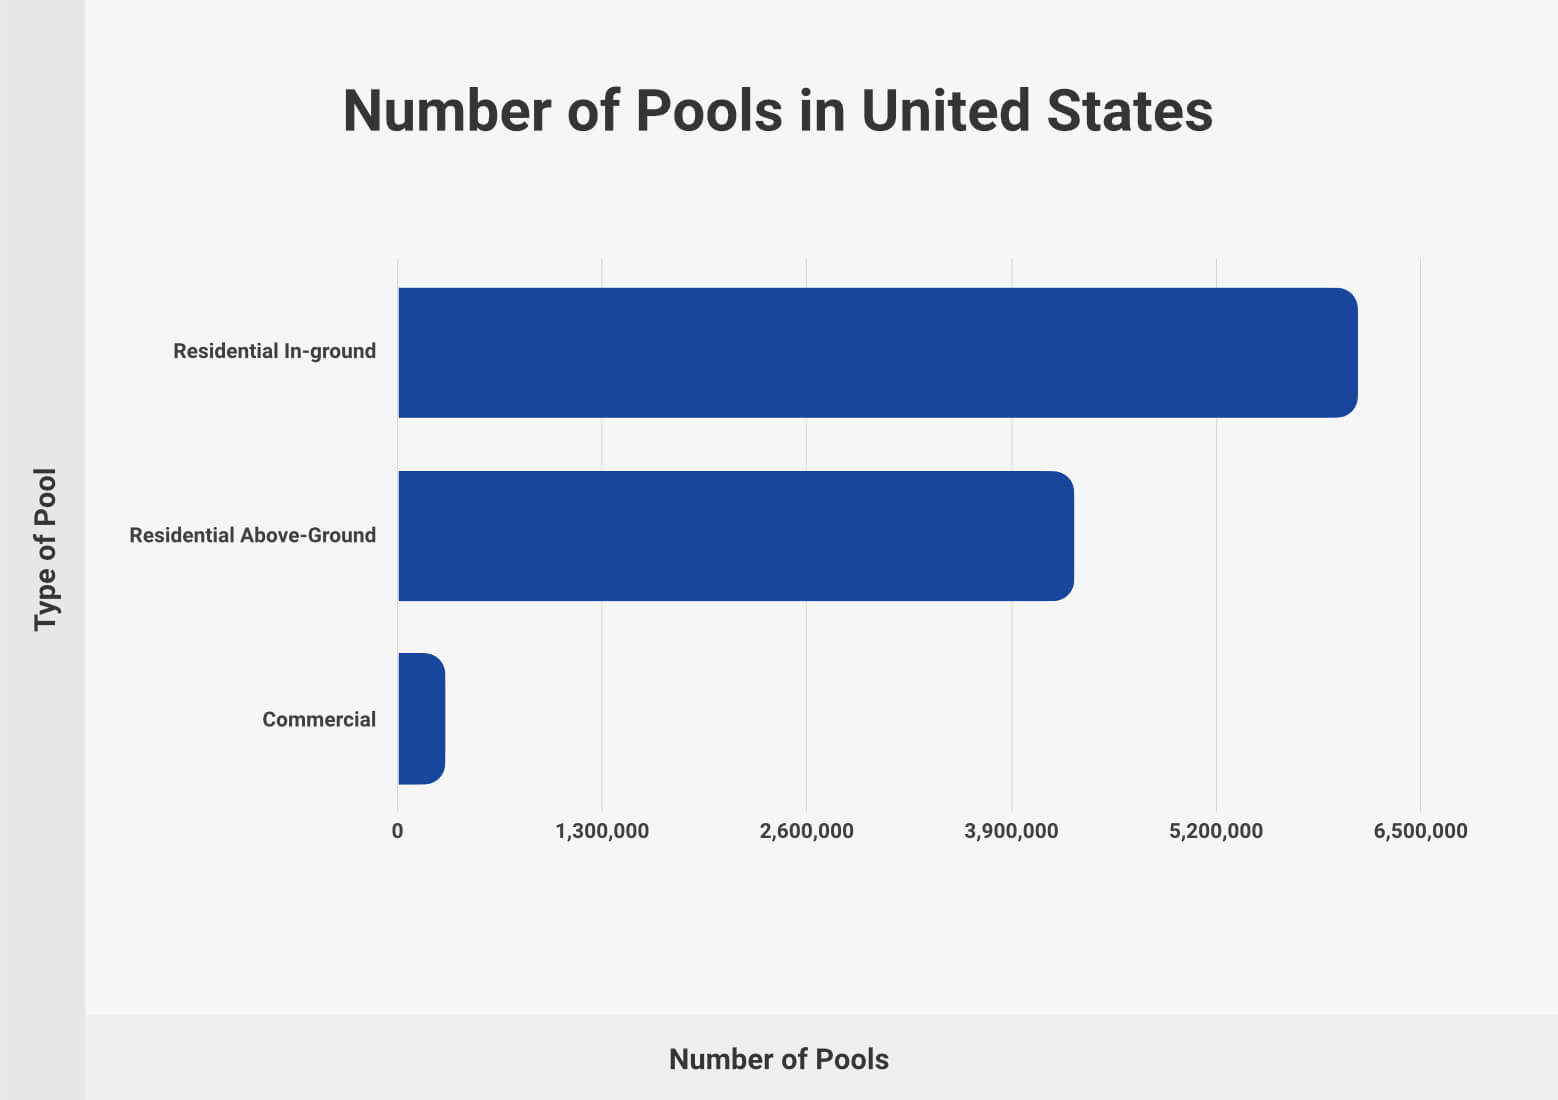 Number of Pools in United States by Type